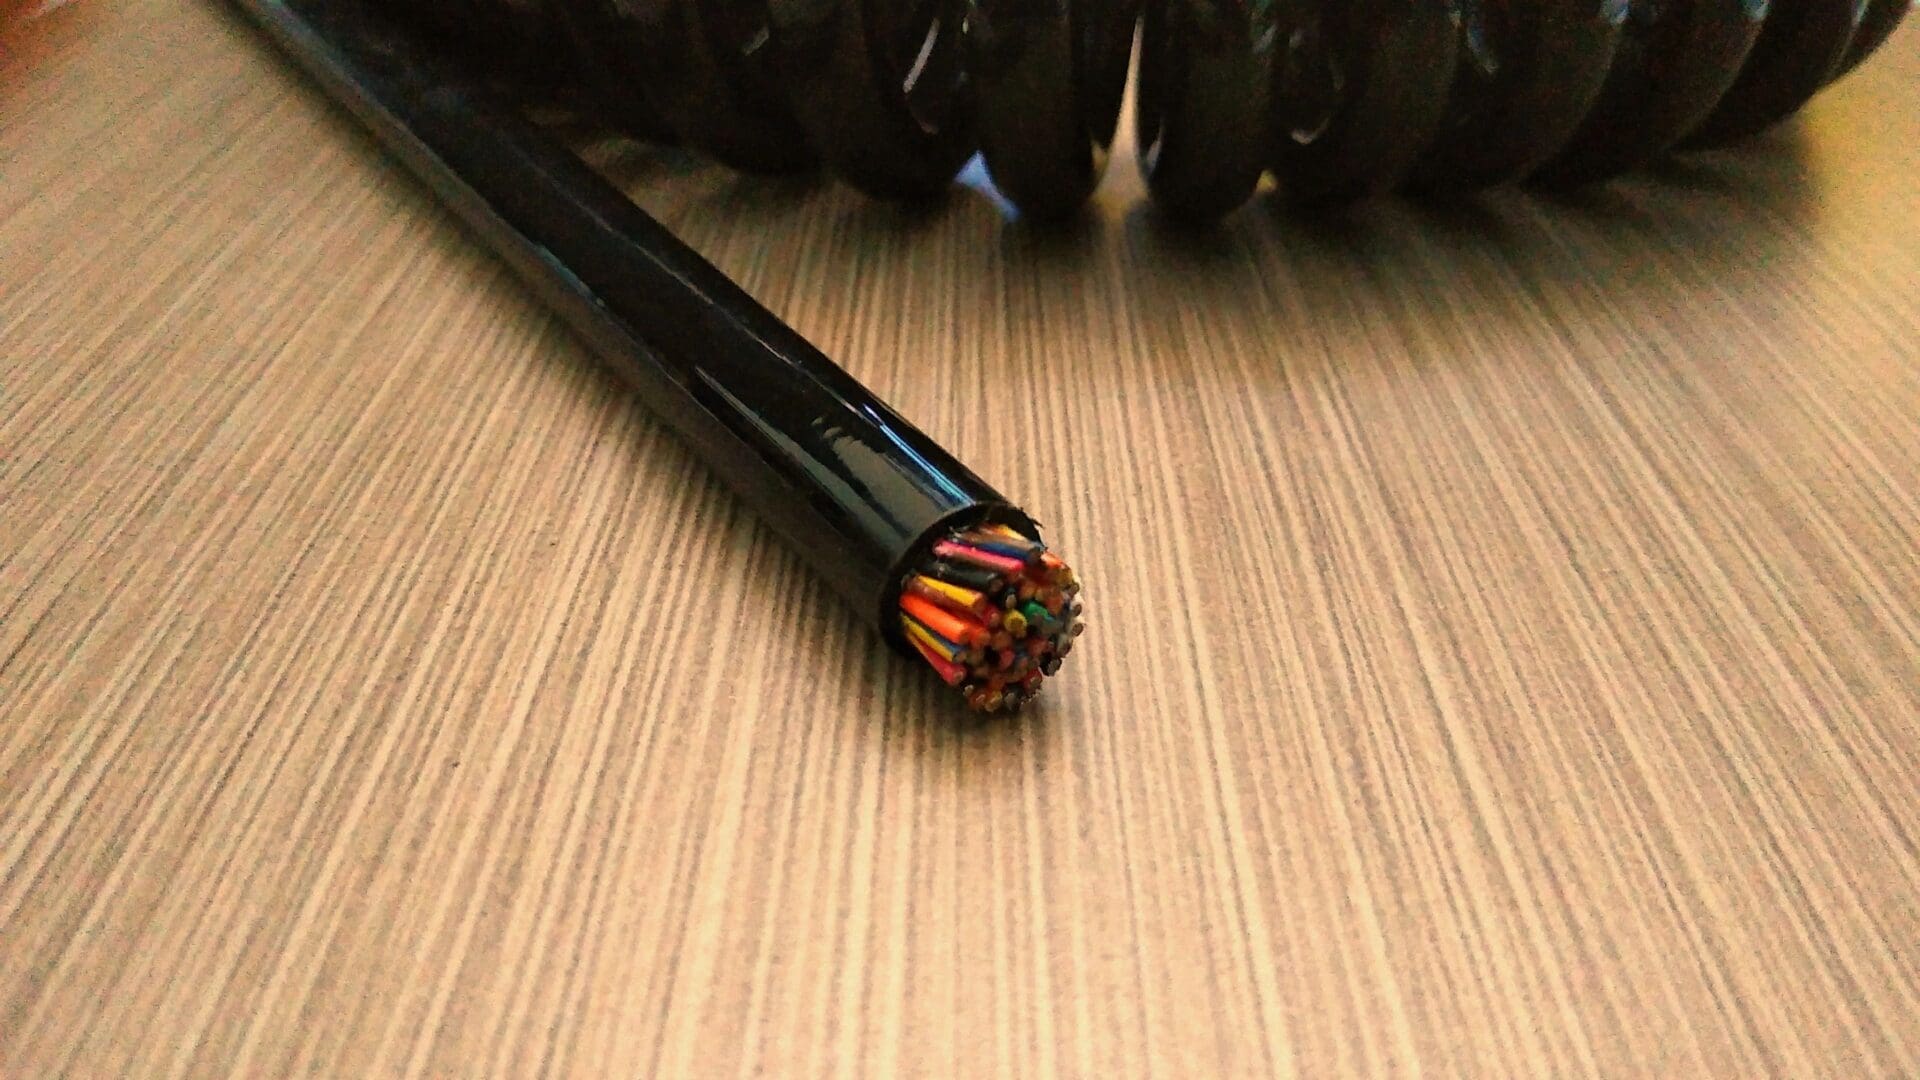 A black wire is sitting on top of a wooden table.